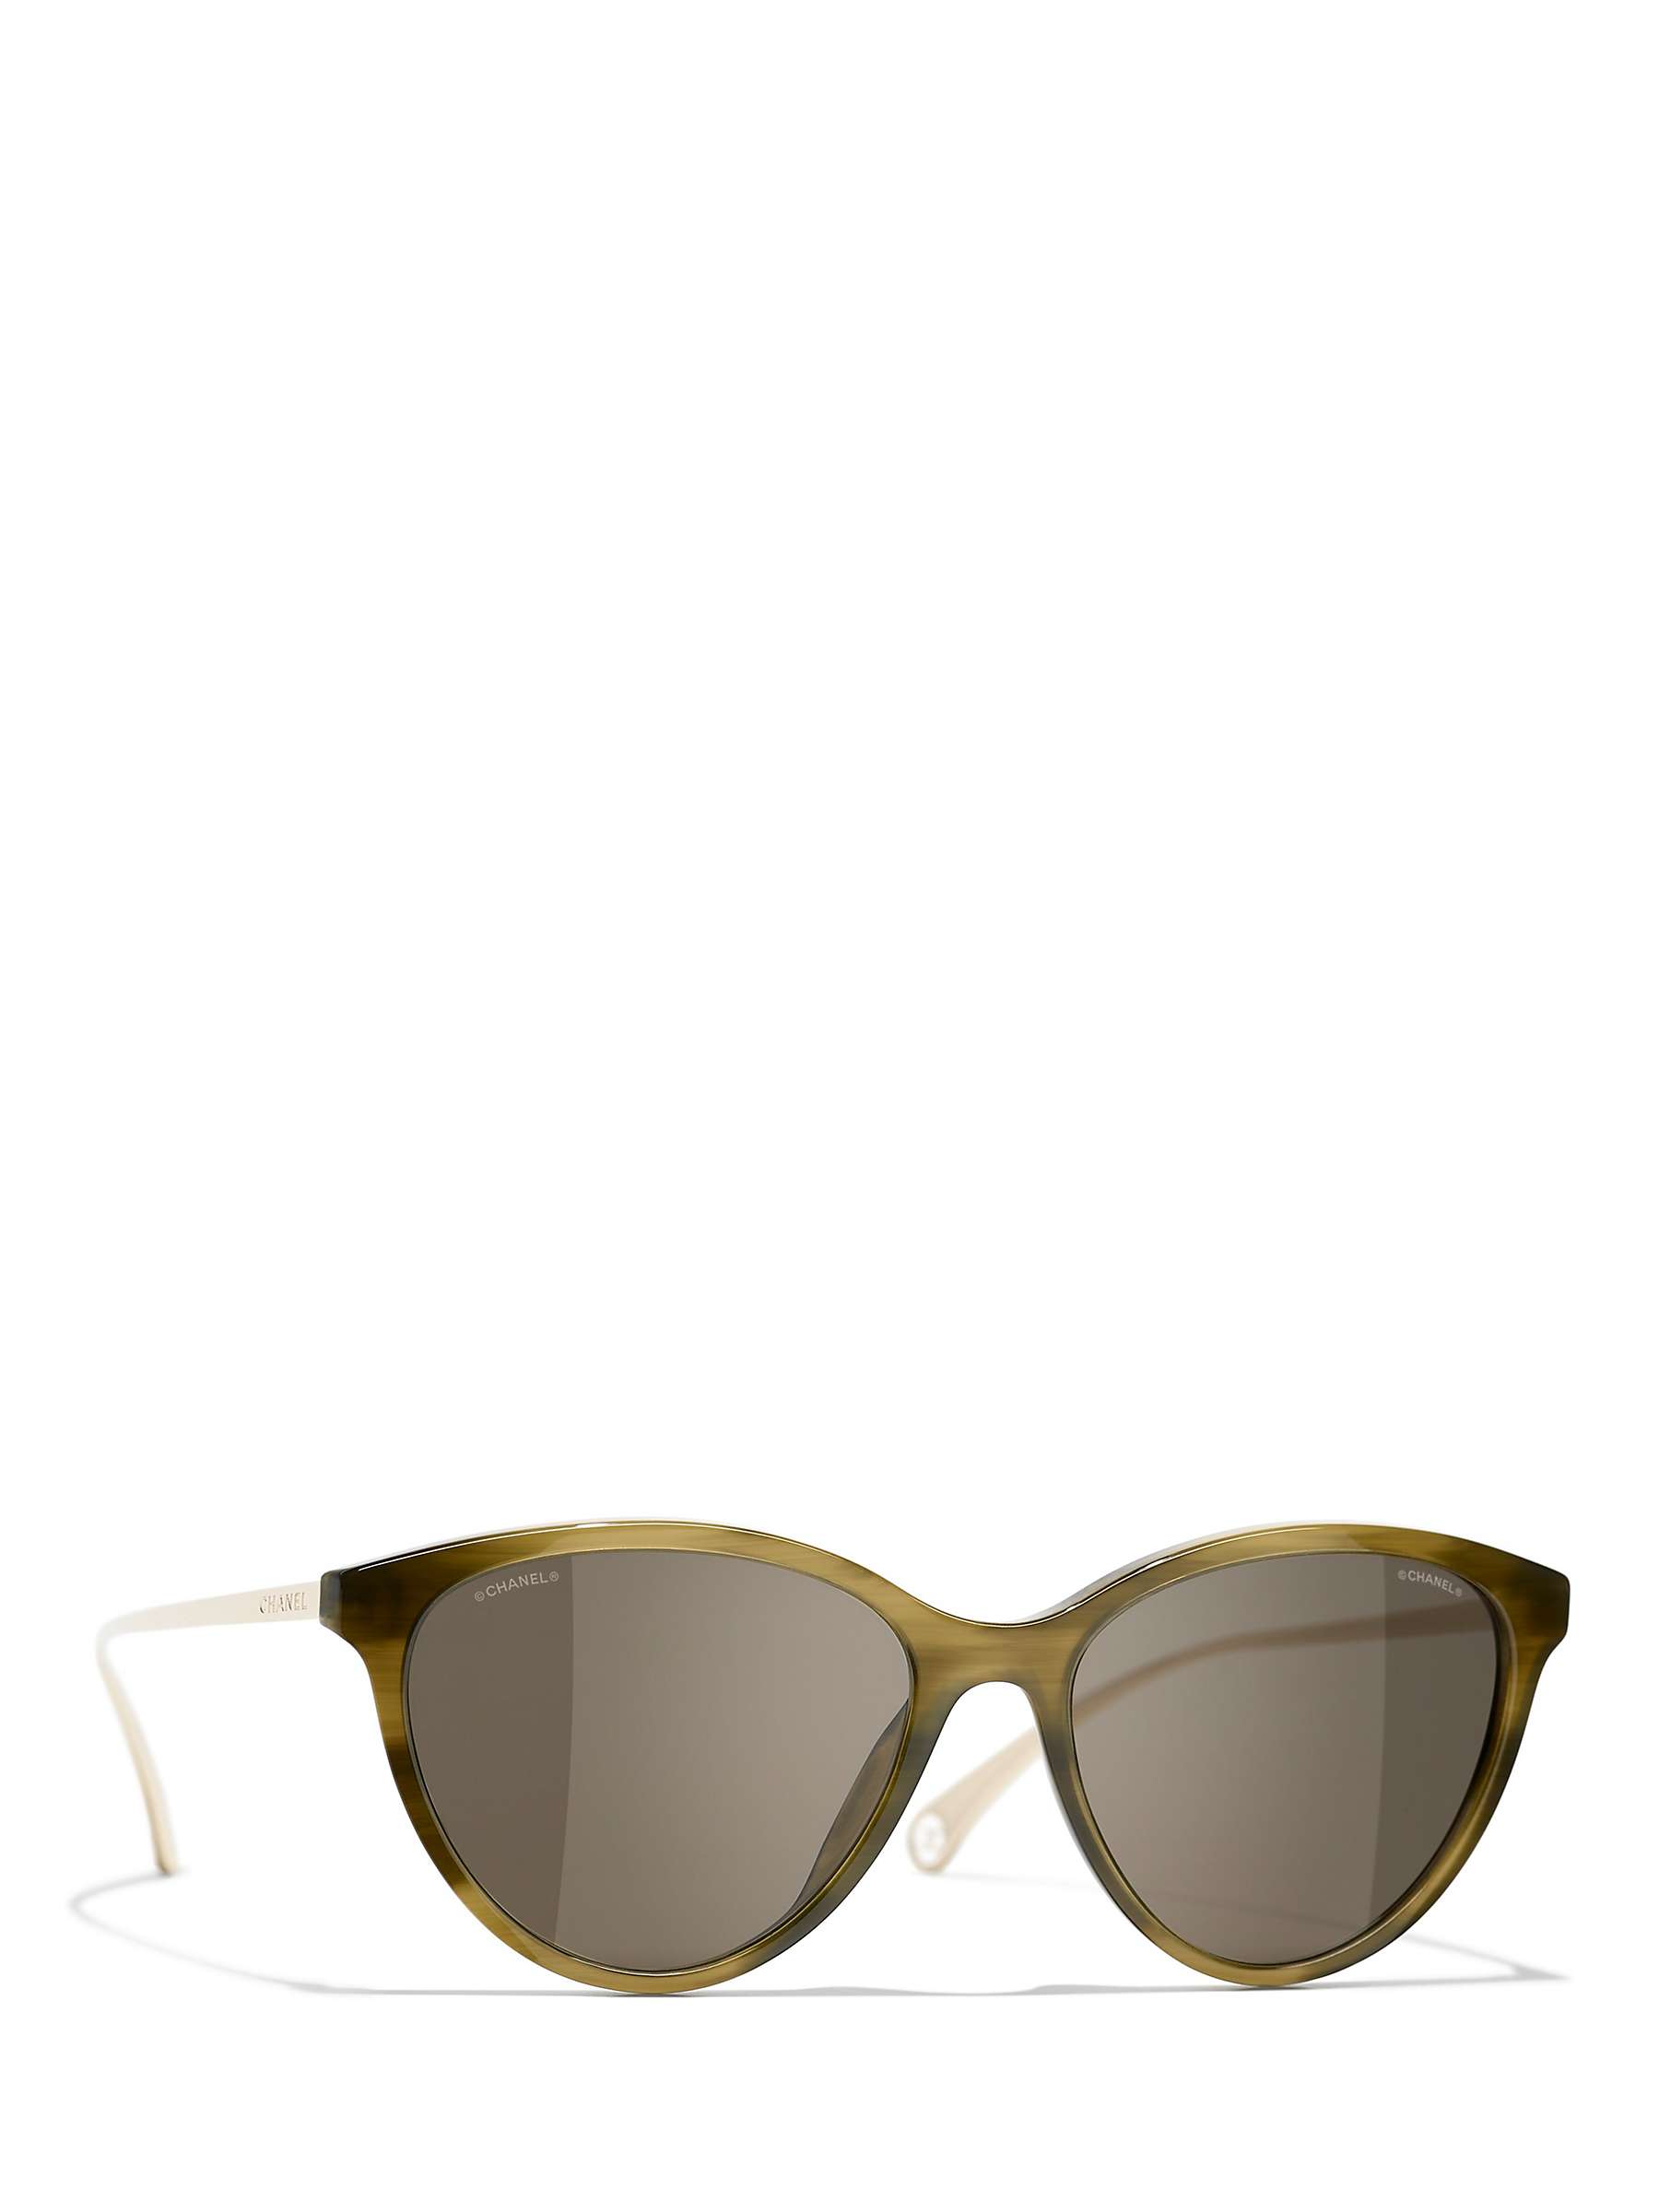 Buy CHANEL CH5459 Oval Sunglasses, Green/Brown Online at johnlewis.com